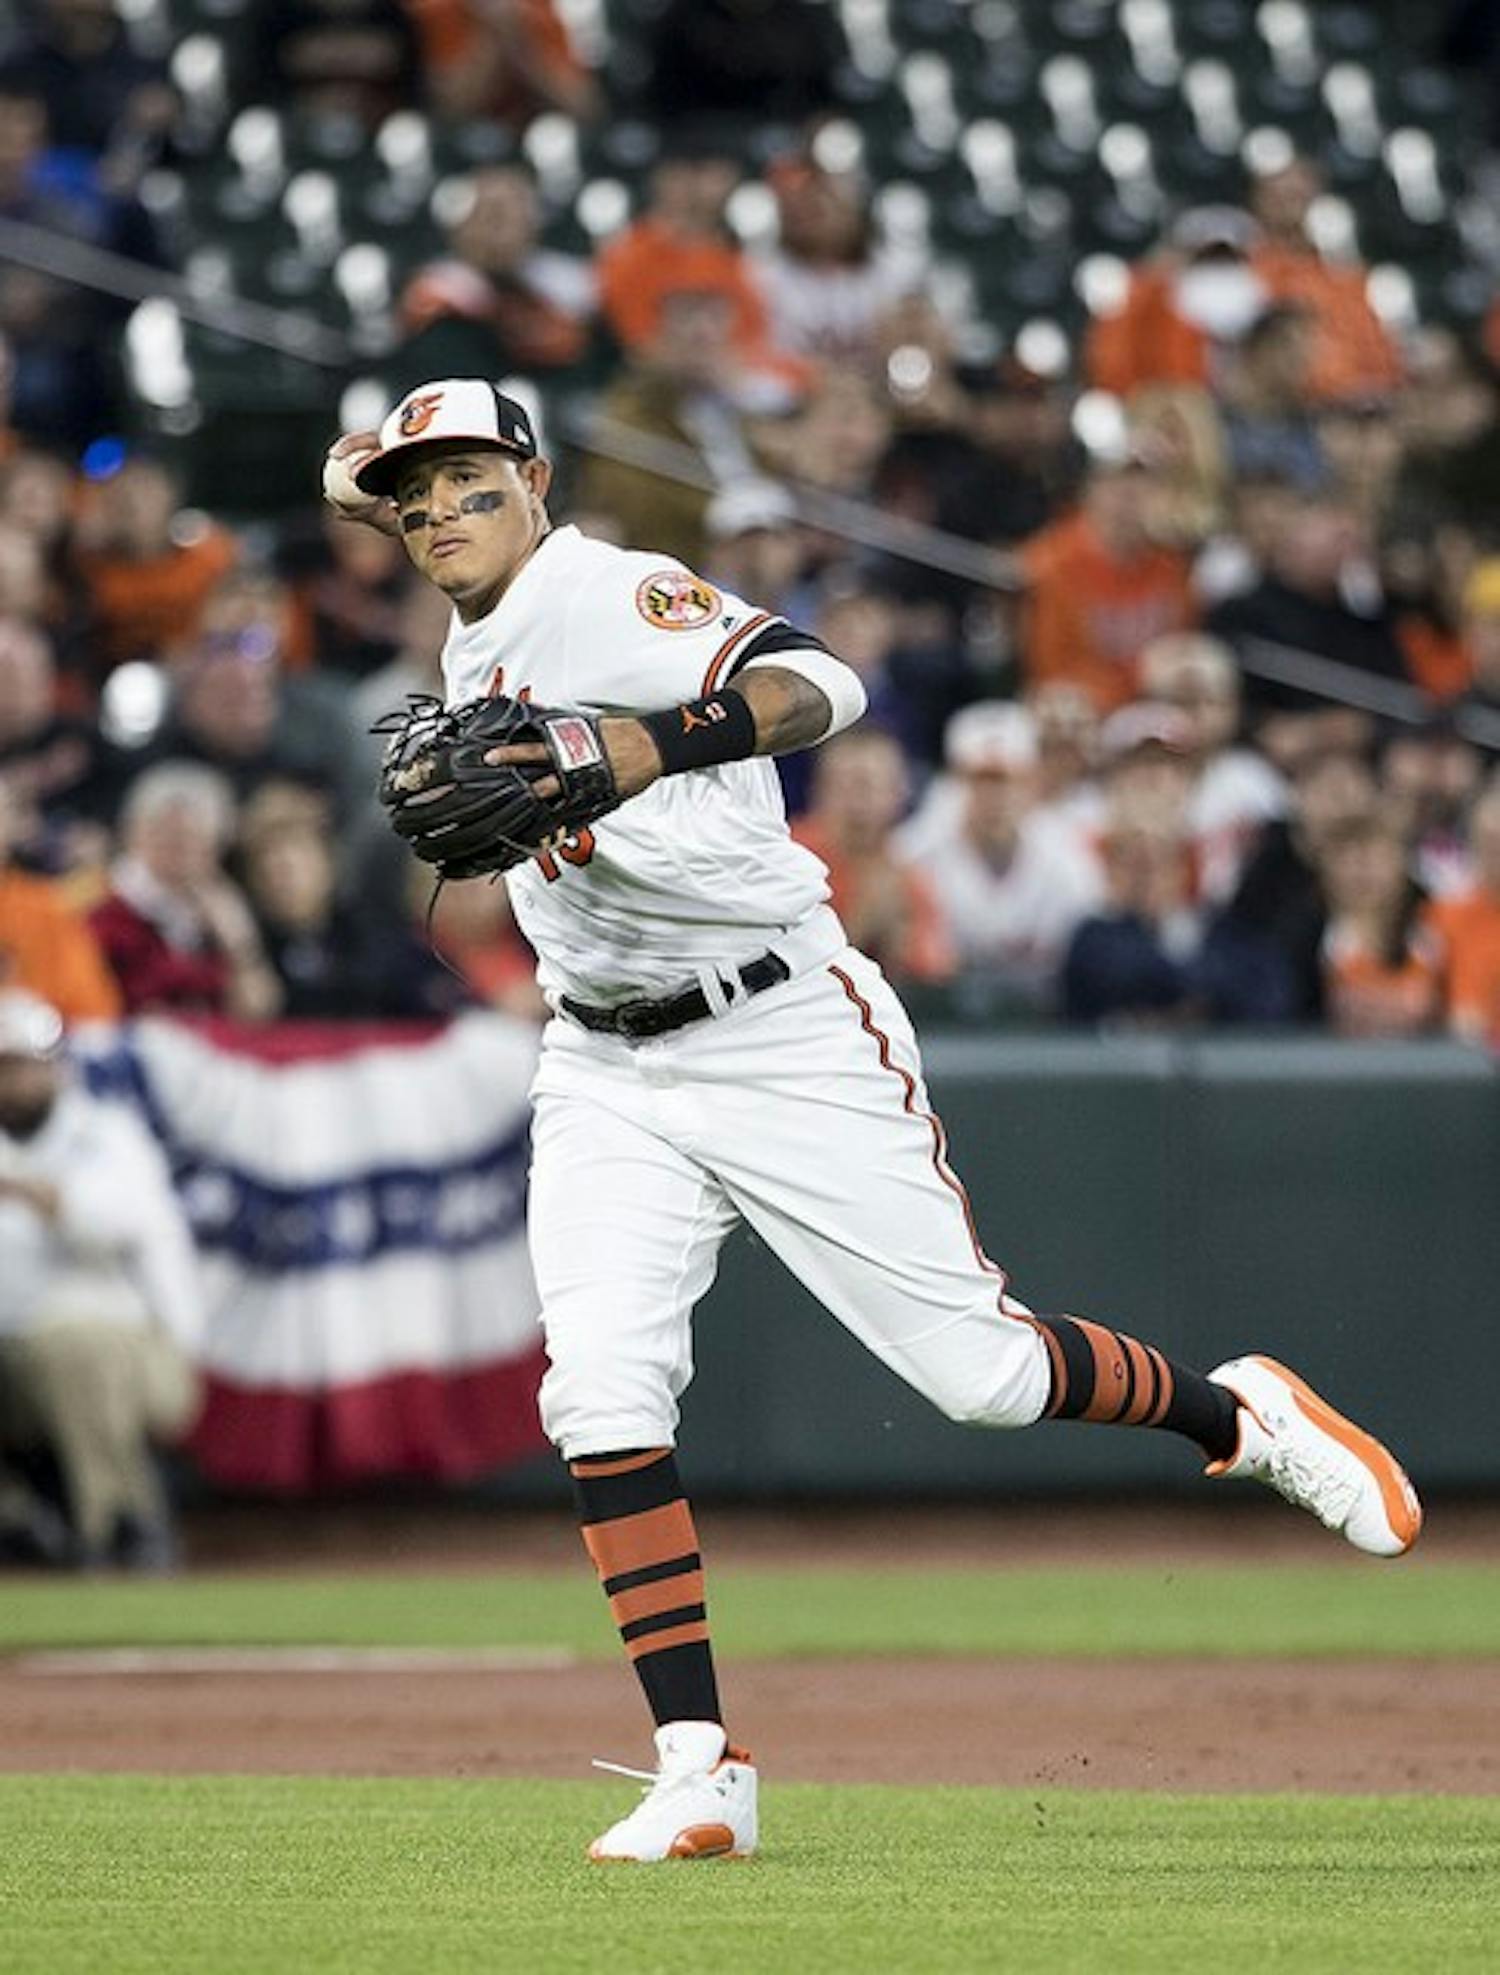 Hitters like Manny Machado are more predictable in fantasy baseball then pitchers like James Paxton who have gotten off to a hot start this season.&nbsp;